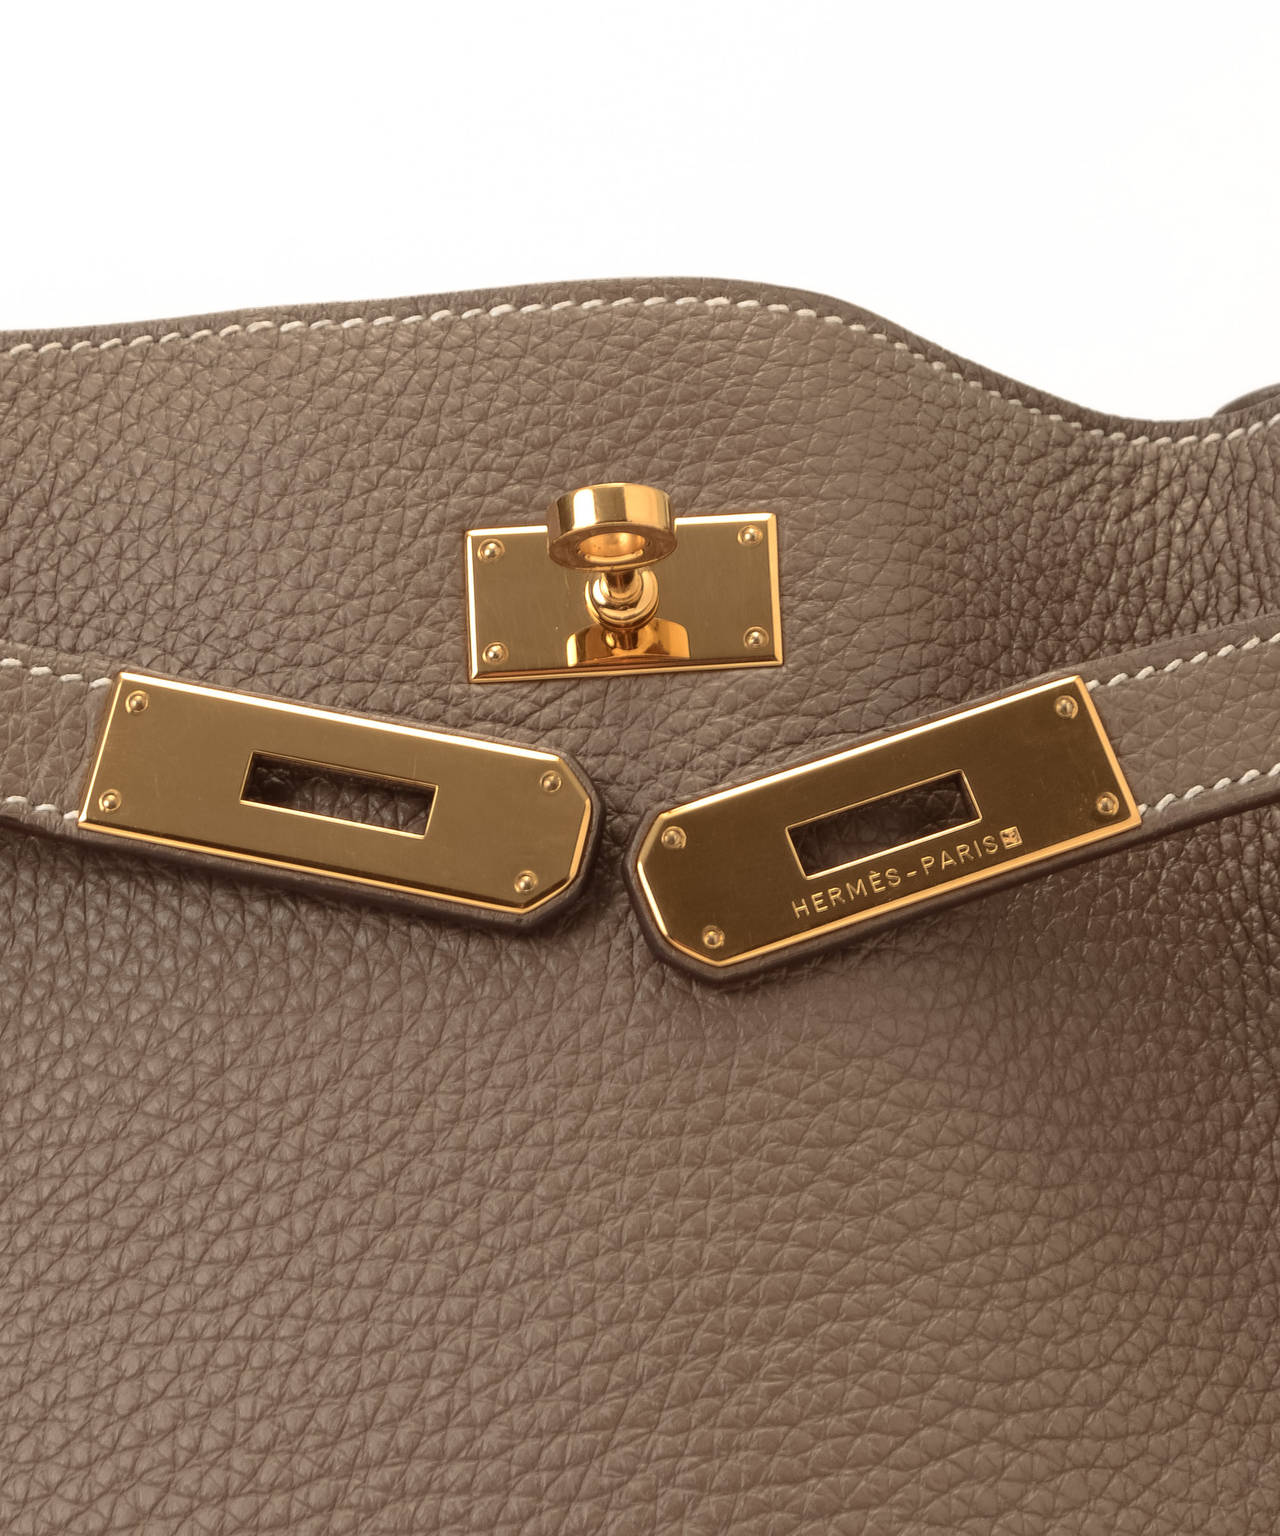 Hermes So Kelly In Excellent Condition For Sale In Beverly Hills, CA